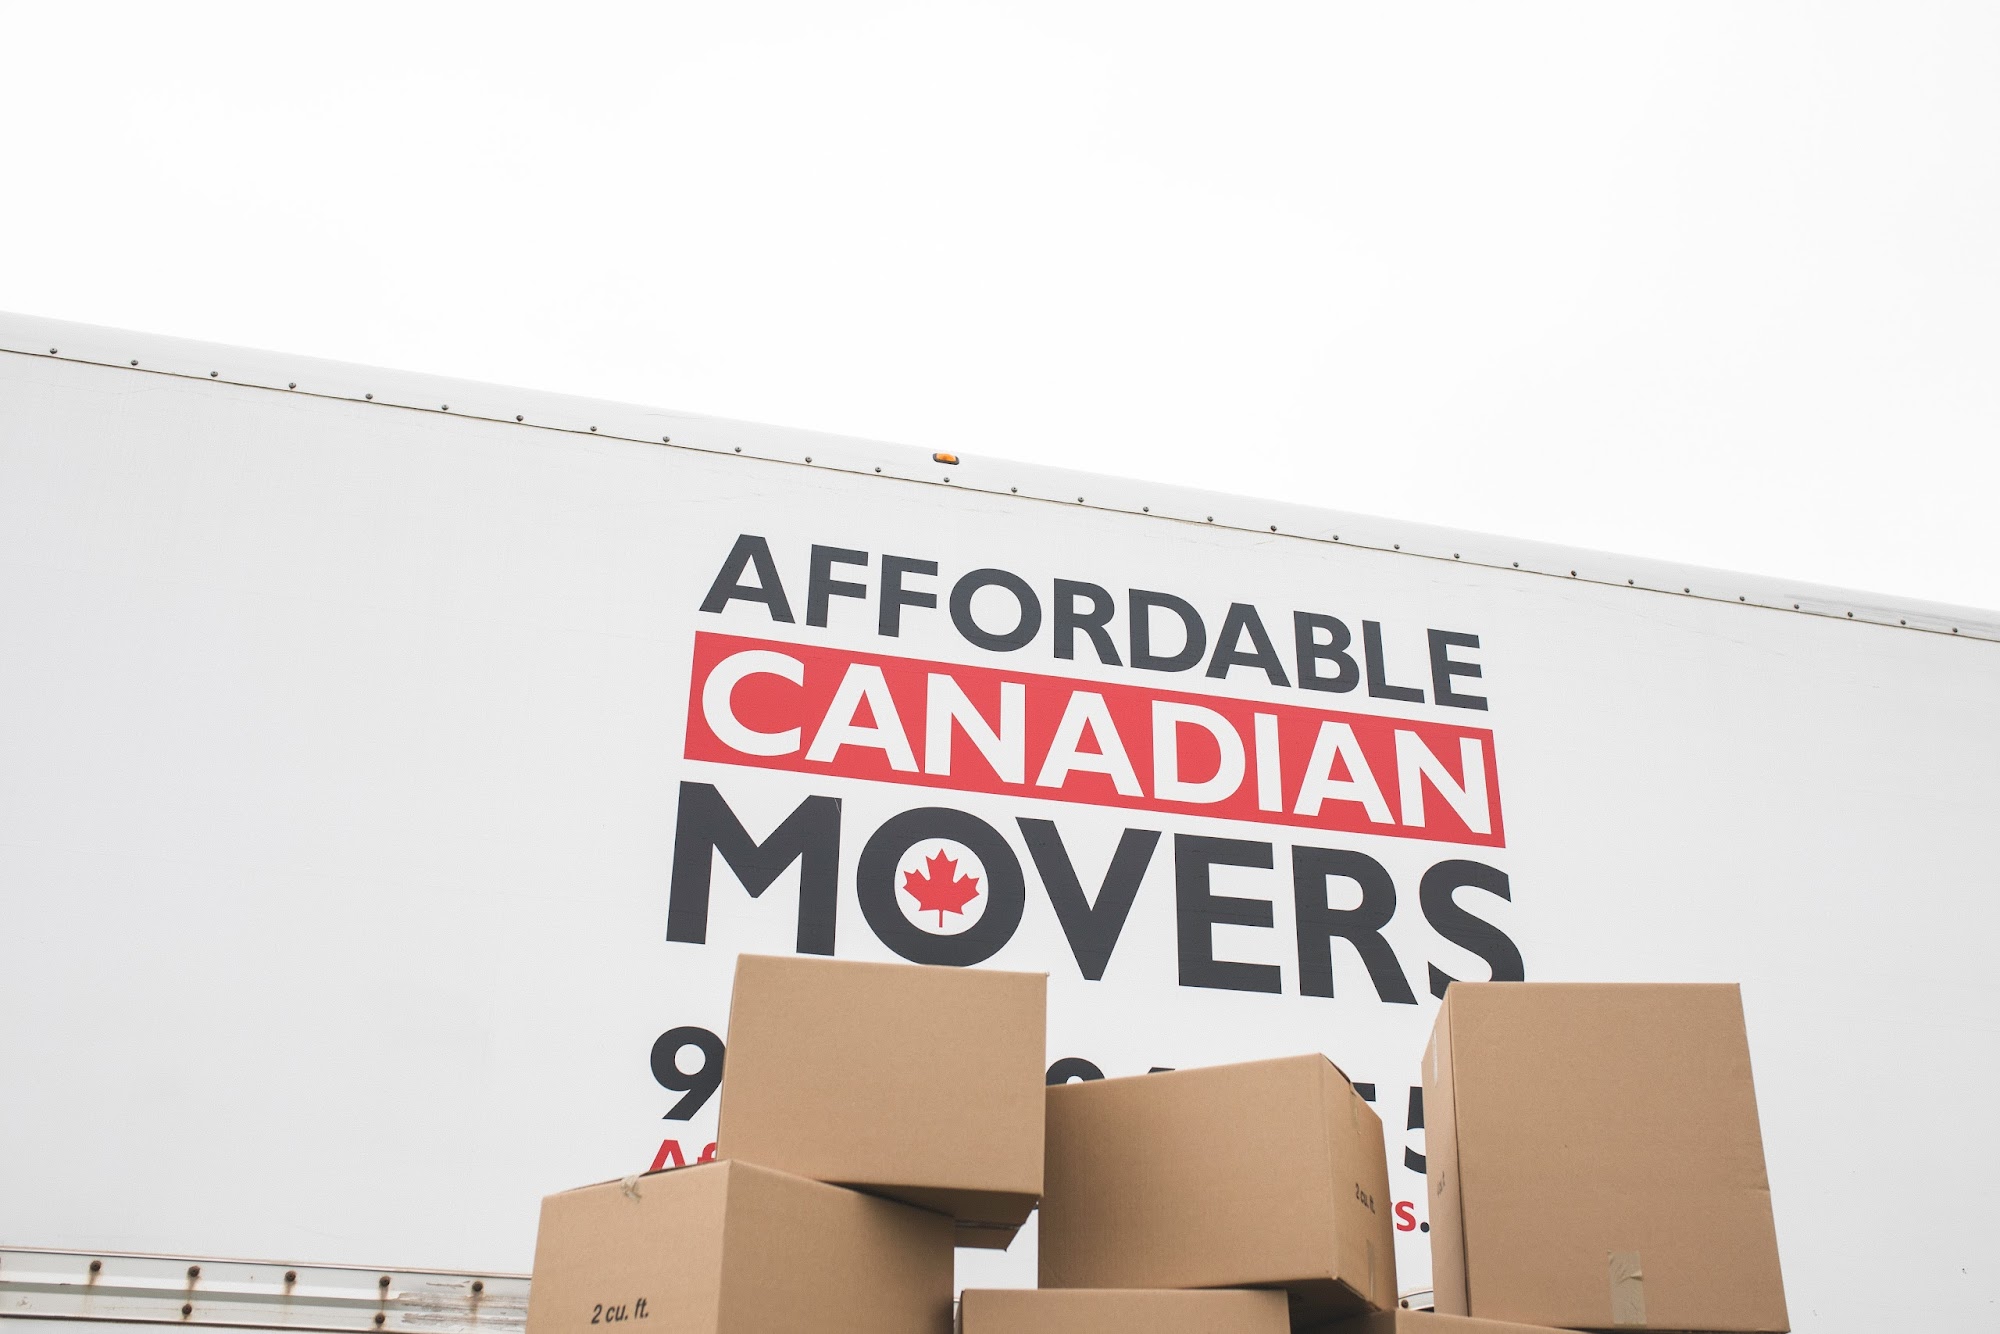 Affordable Canadian Movers 31 Hollis Ave, Stratford Prince Edward Island C1B 4A1